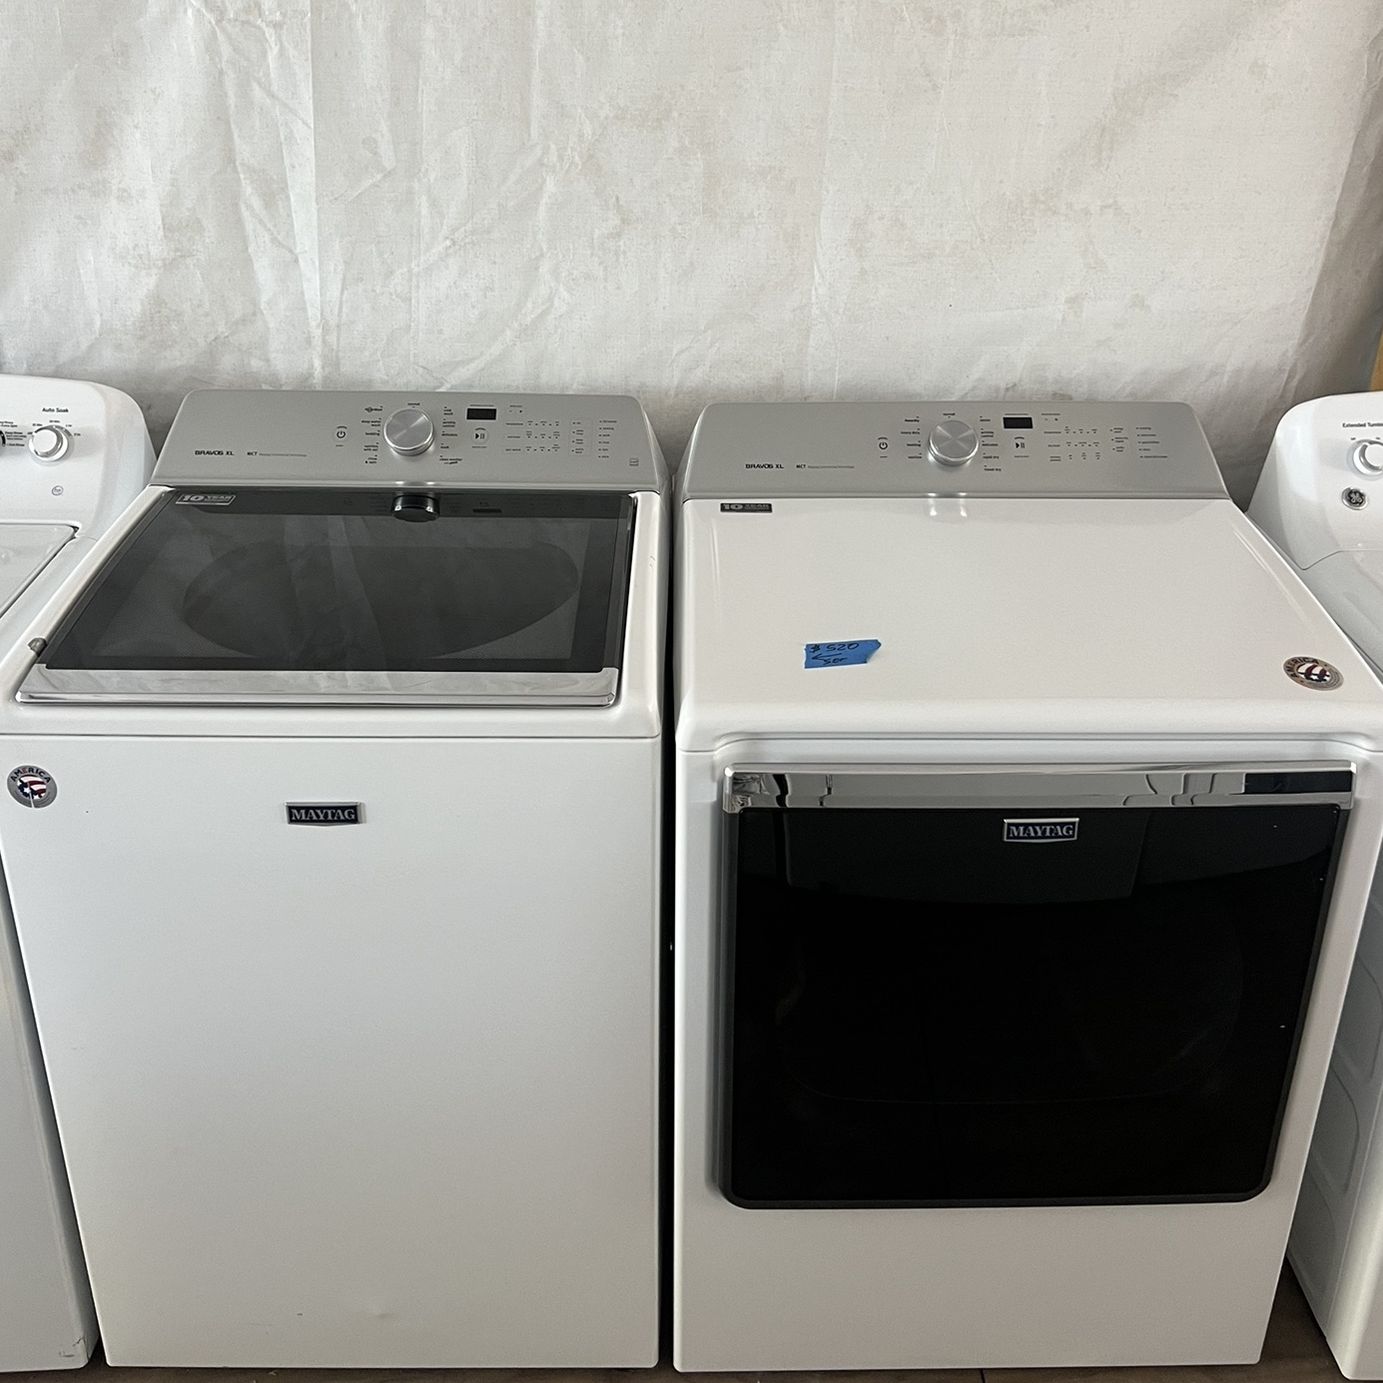 Maytag Washer&dryer Large Capacity Set   60 day warranty/ Located at:📍5415 Carmack Rd Tampa Fl 33610📍